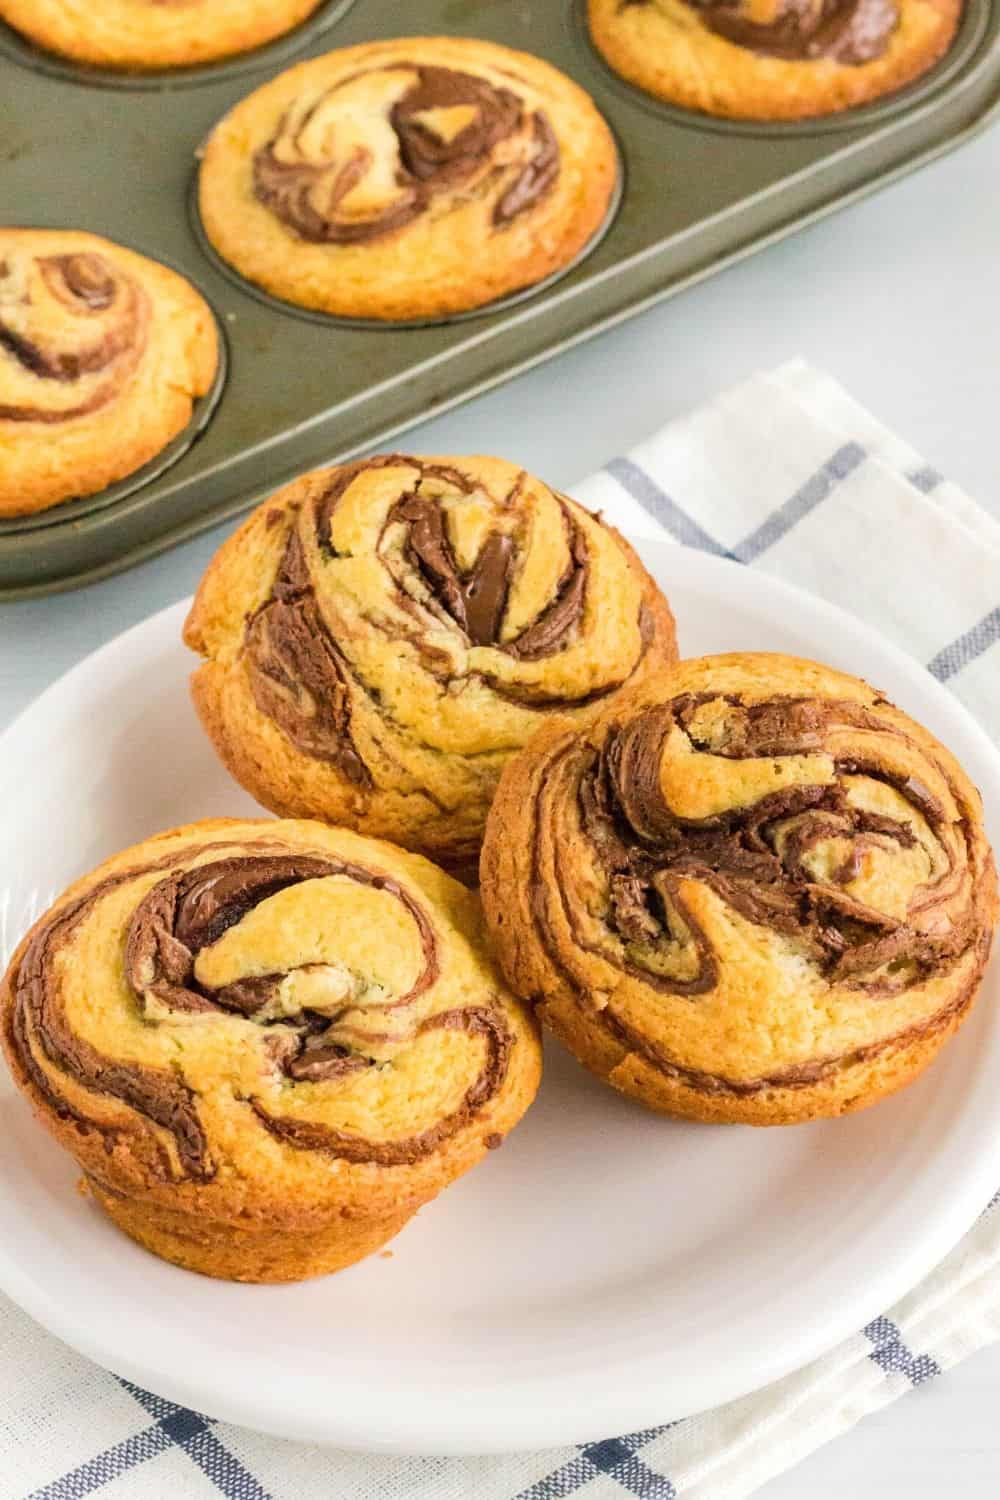 three swirled Nutella muffins are served on a white plate, with the muffin pan of remaining muffins in the background.